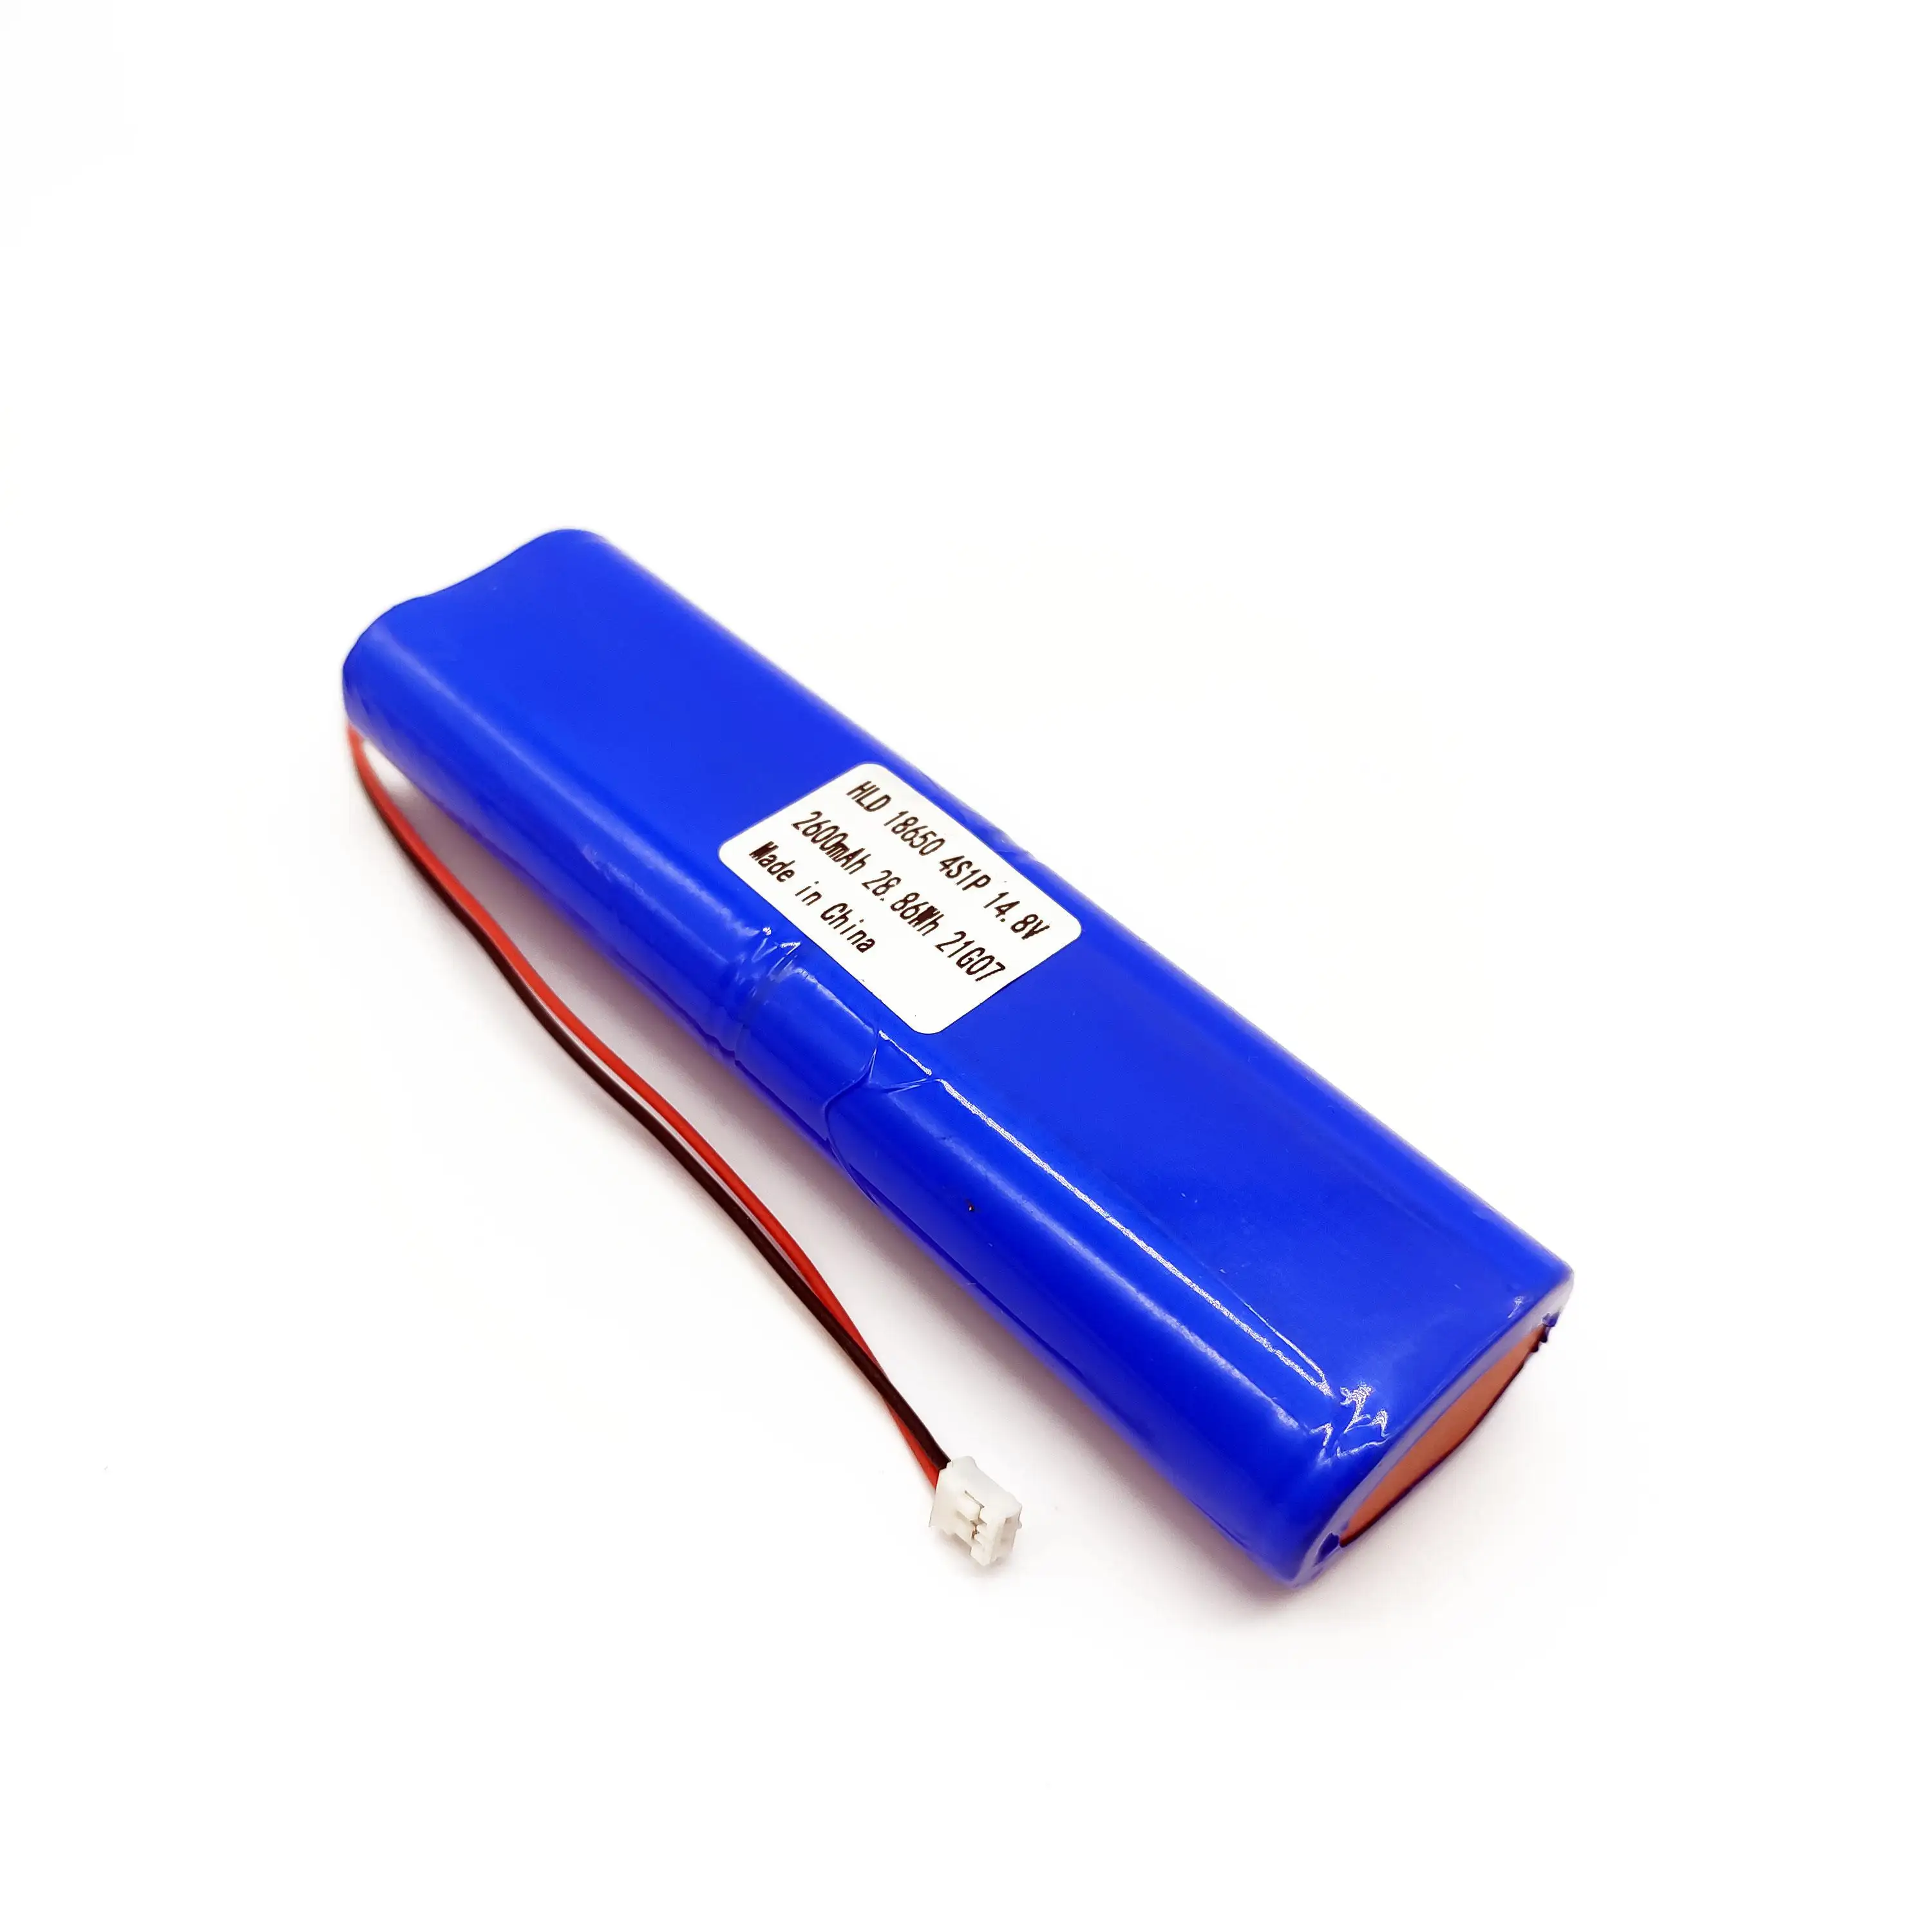 18650-4s1p 18650 lithium ion battery rechargeable lithium ion battery 18650 2600mah rechargeable battery